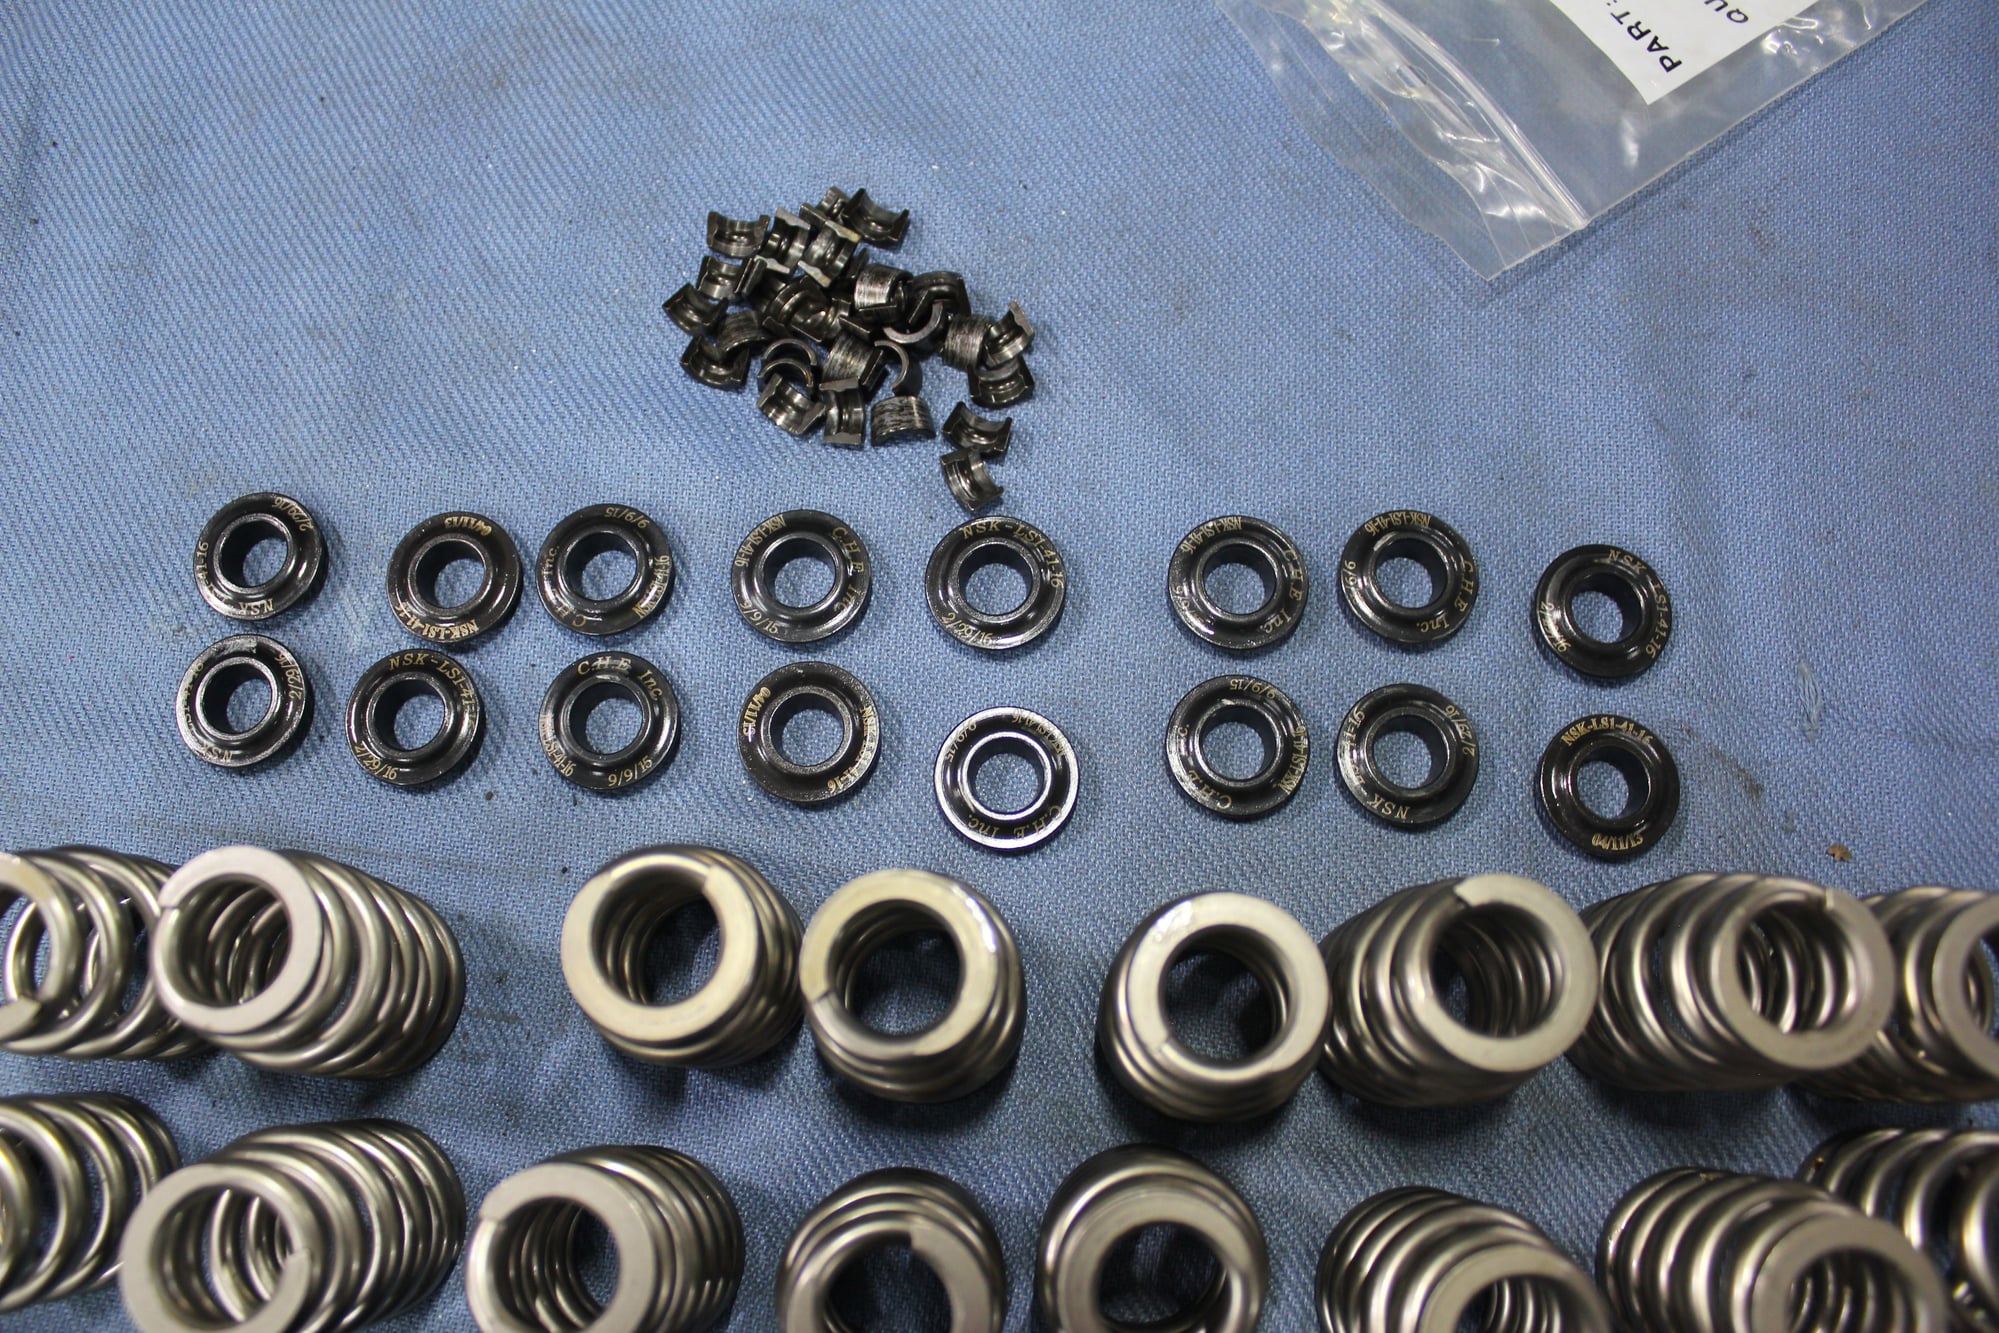 Engine - Intake/Fuel - Psi beehive valve springs - Used - 1999 to 2014 Chevrolet All Models - Daytona Beach, FL 32117, United States